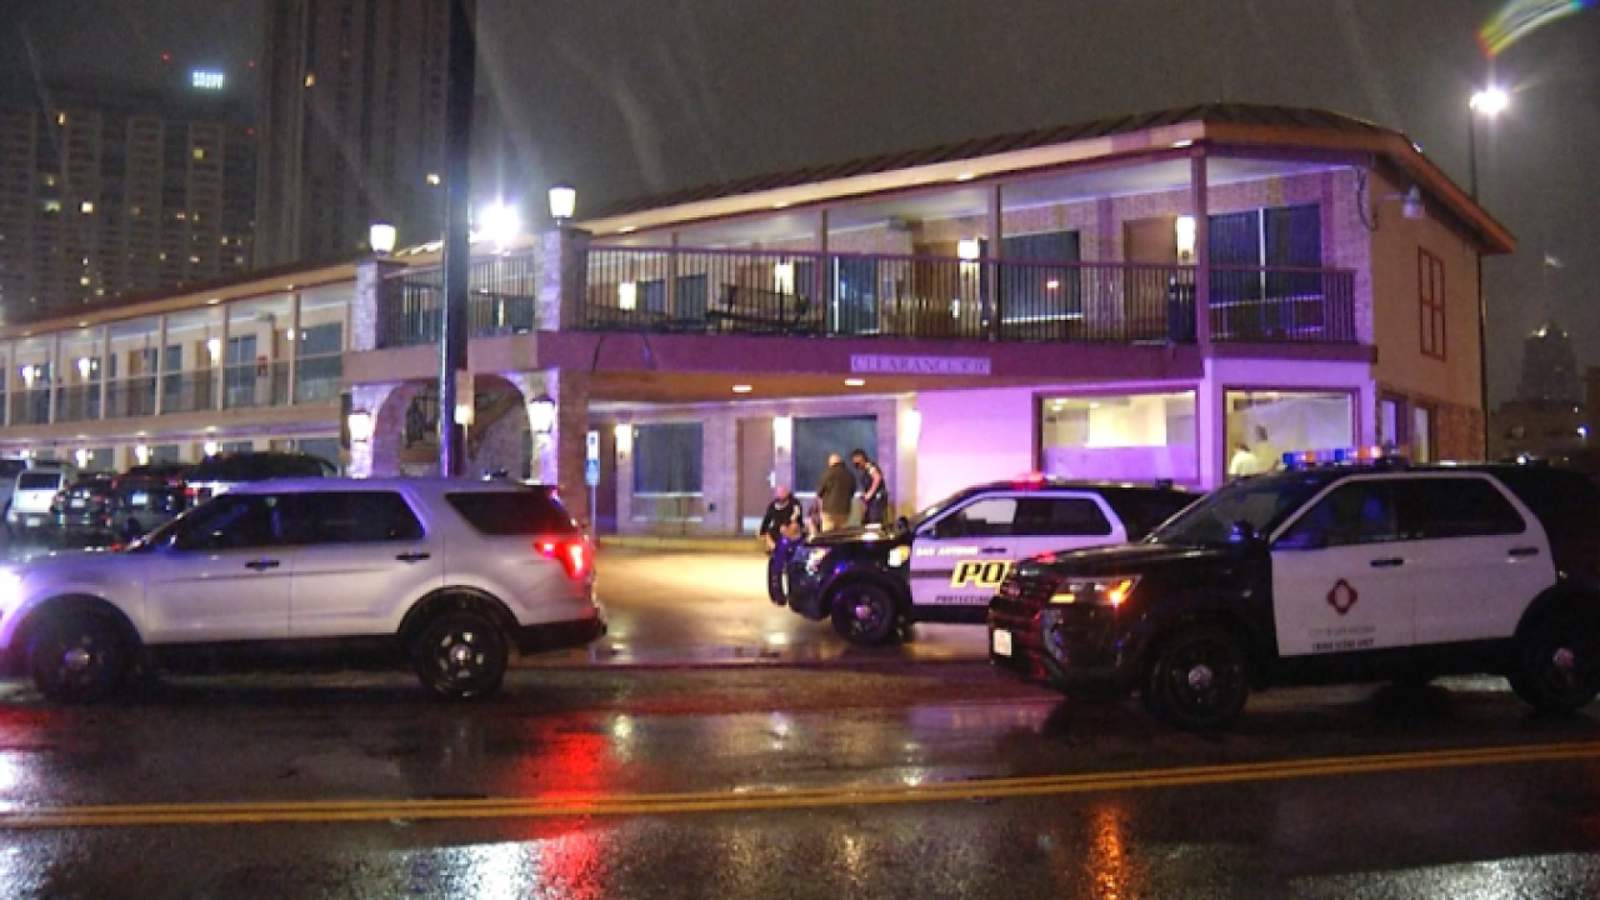 Woman assaulted, shot in parking lot of downtown motel, police say